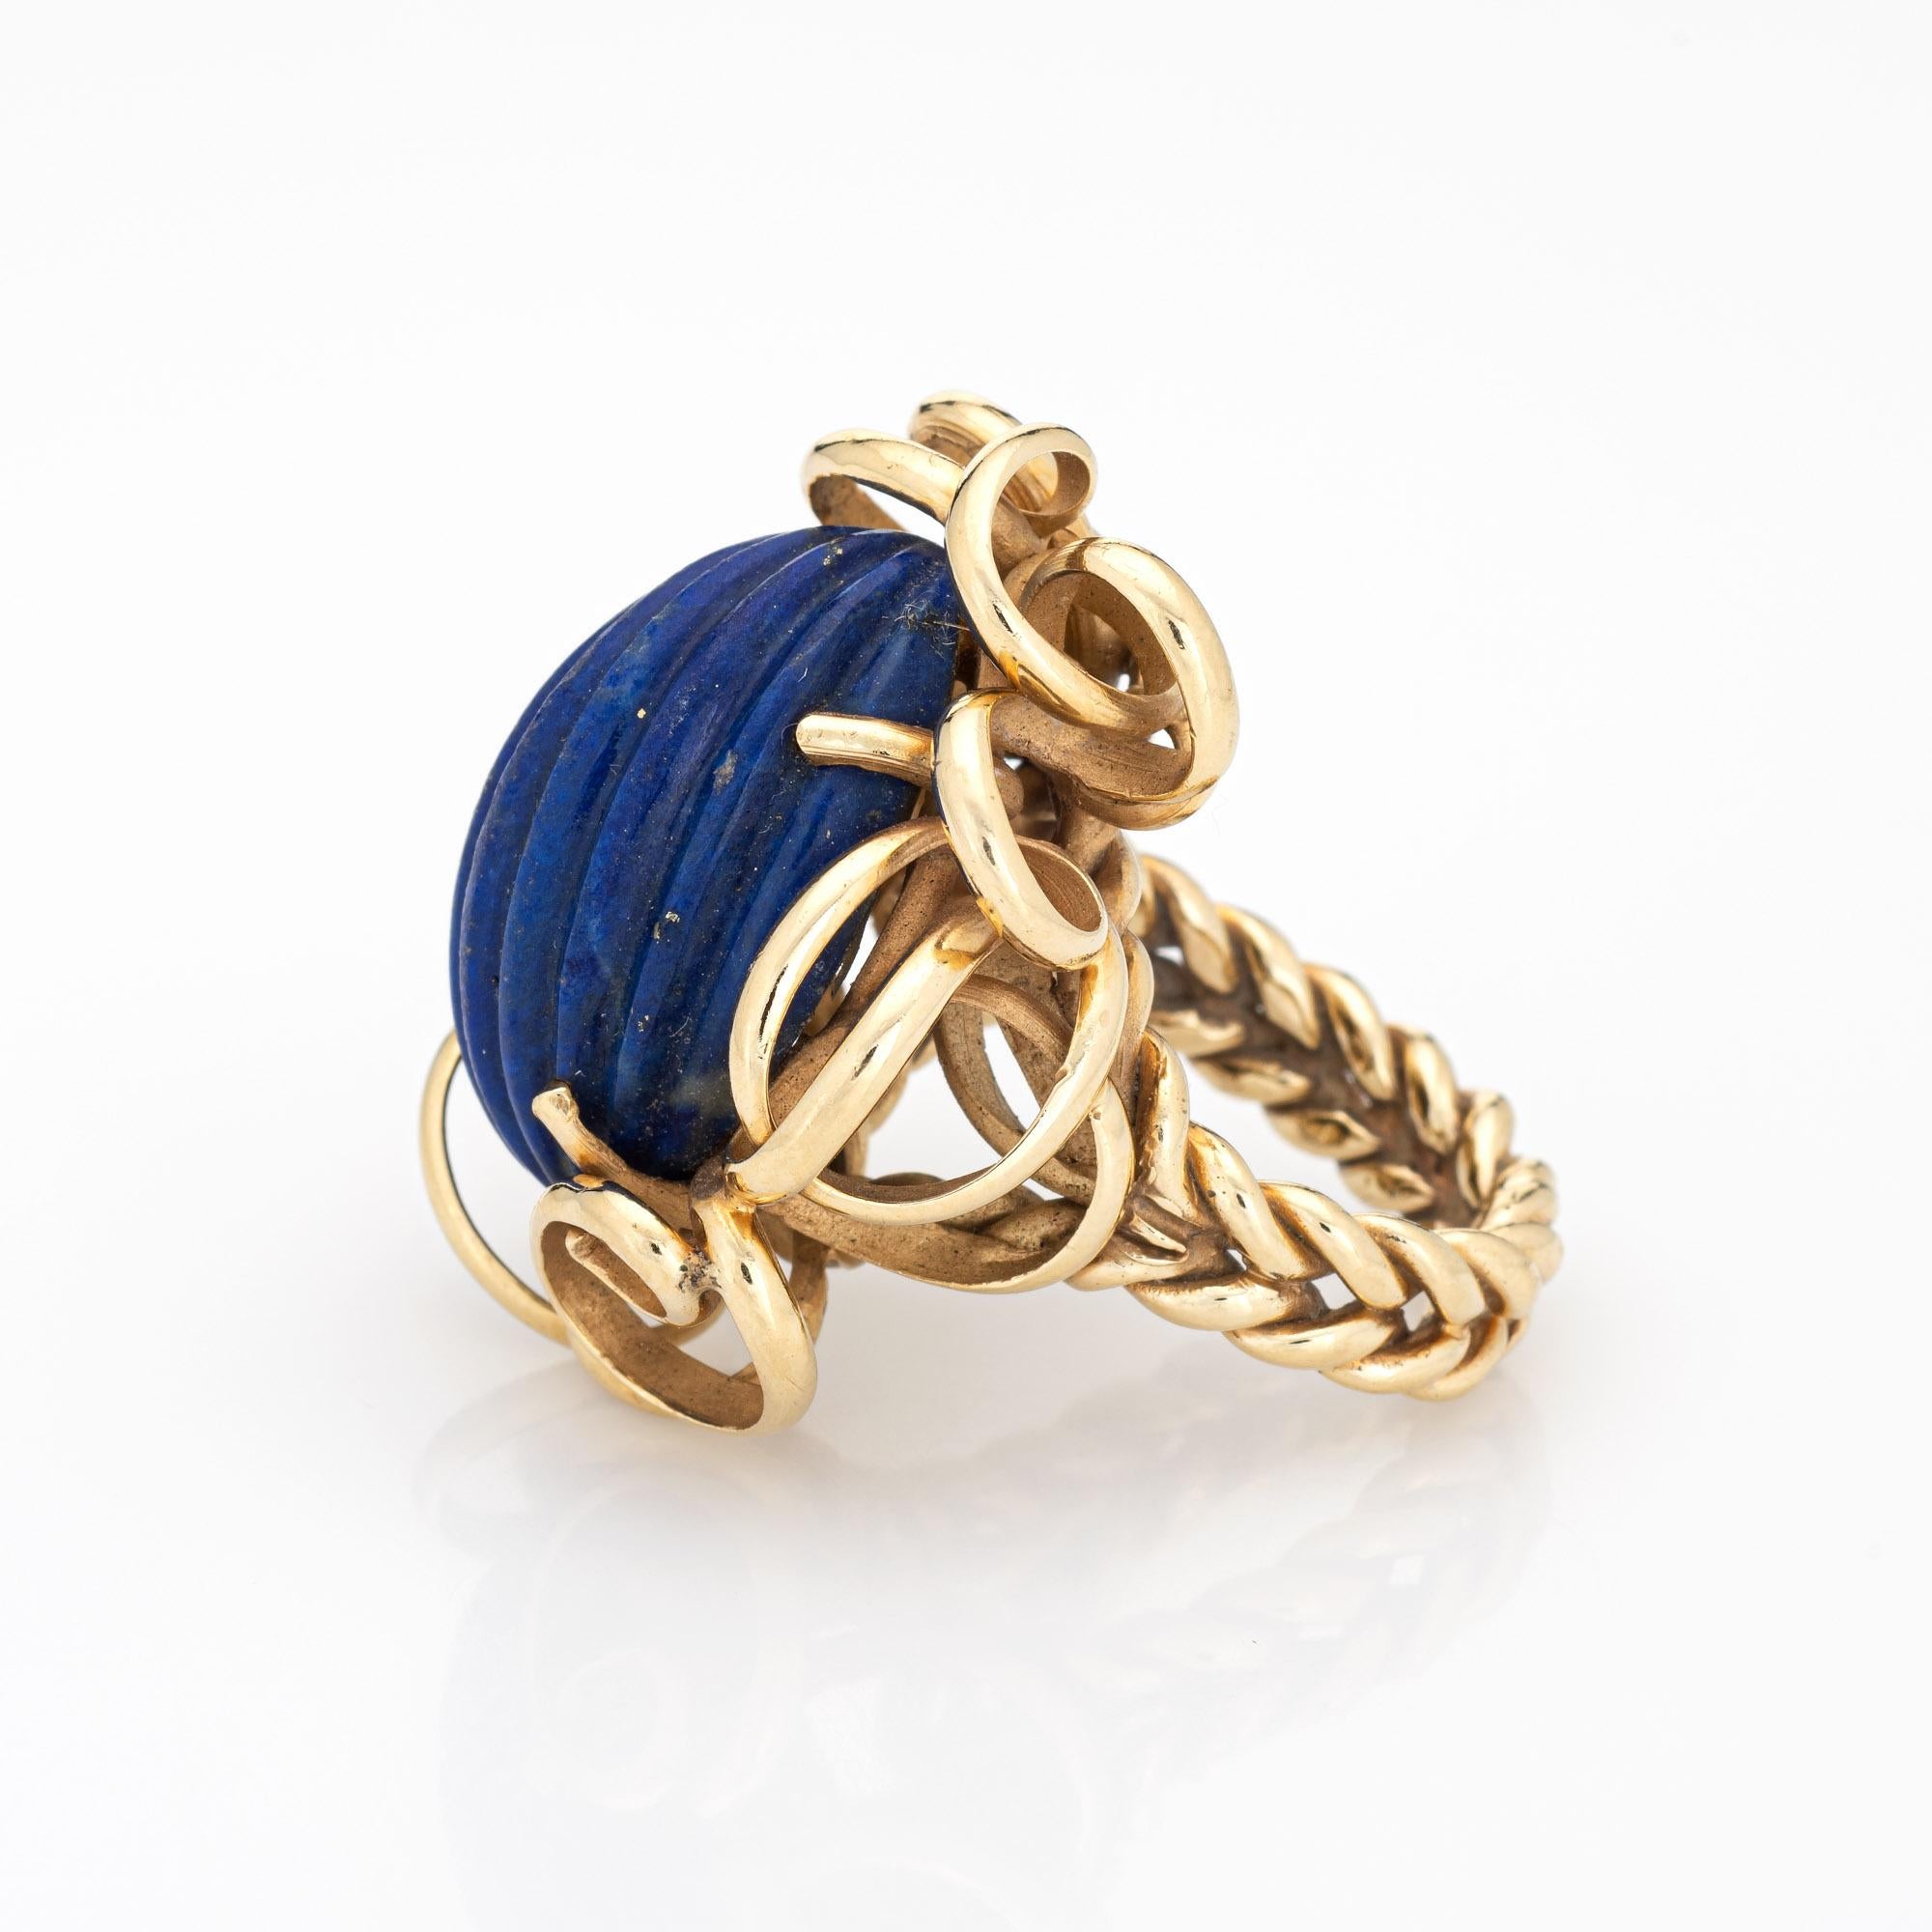 Cabochon Fluted Lapis Lazuli Ring 14k Yellow Gold 60s Vintage Large Cocktail Ring Heavy For Sale